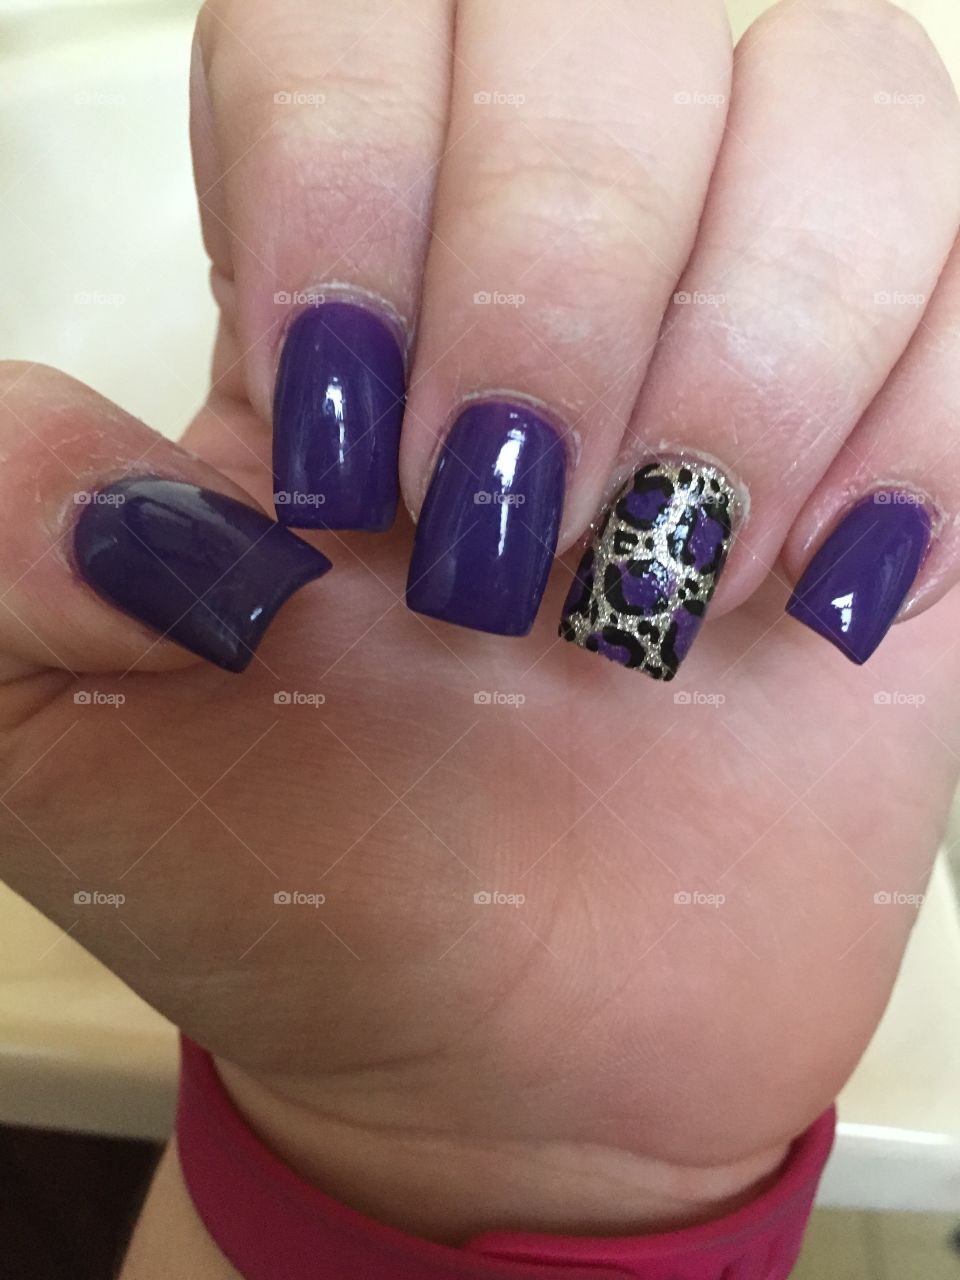 Purple nails with a cheetah pop